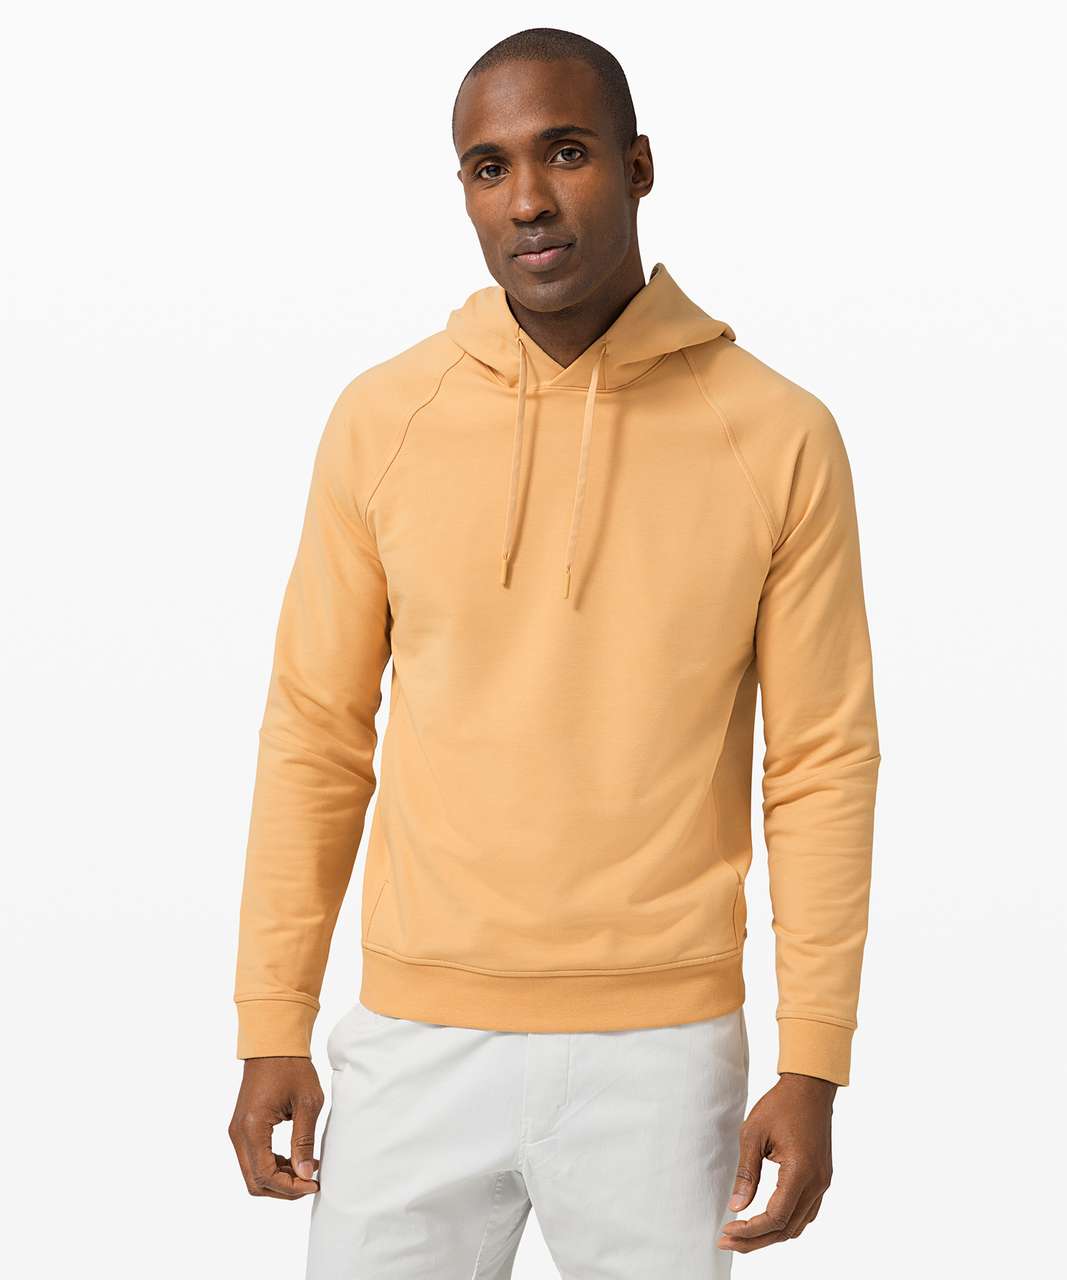 Lululemon City Sweat Pullover Hoodie French Terry - Warm Coral